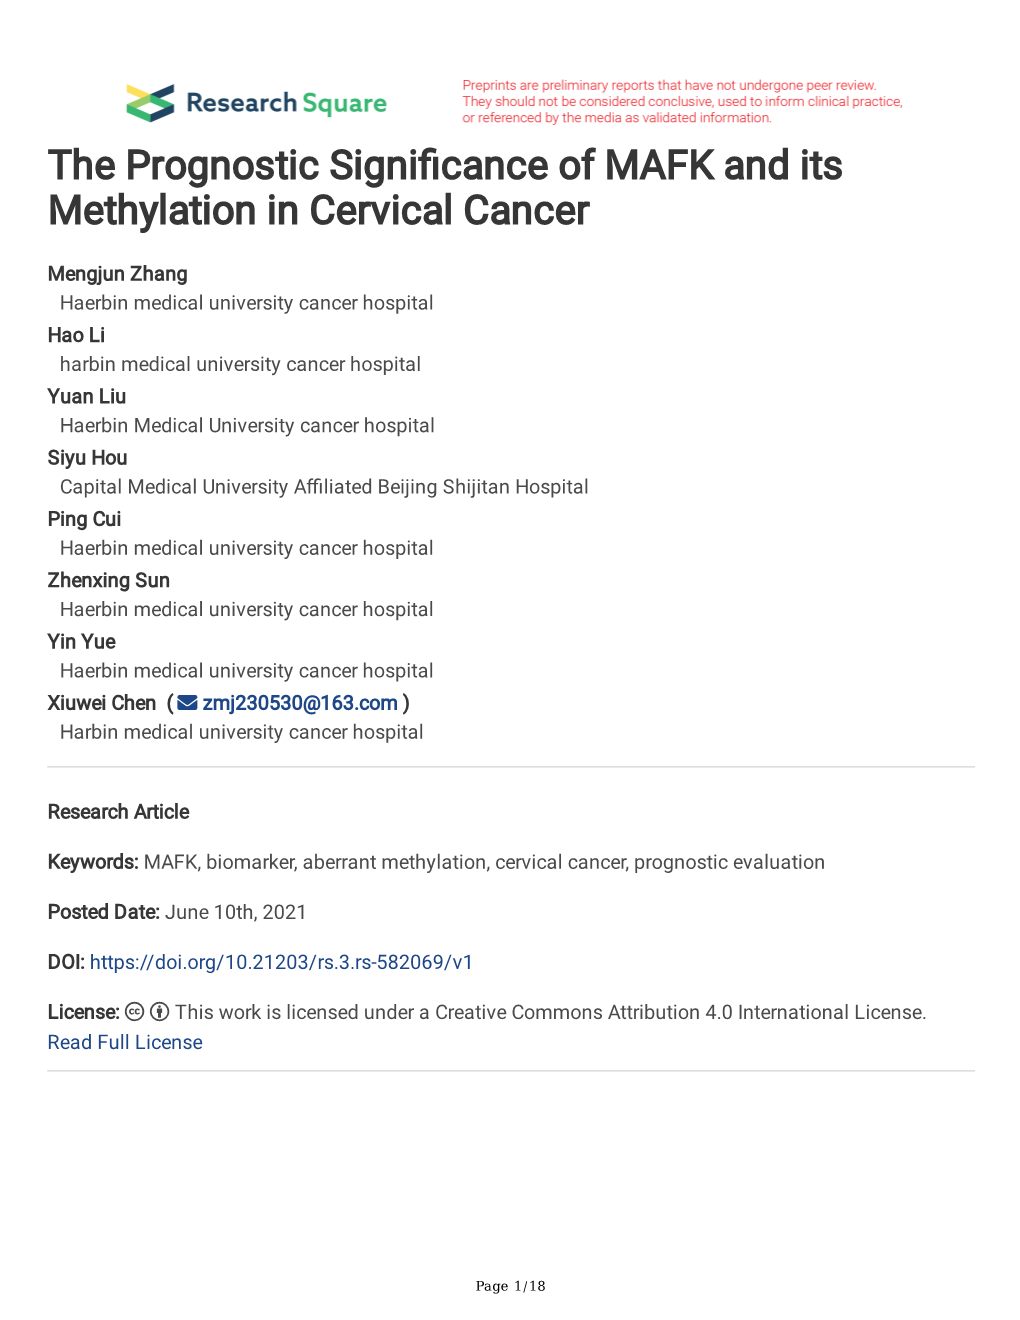 The Prognostic Signi Cance of MAFK and Its Methylation in Cervical Cancer